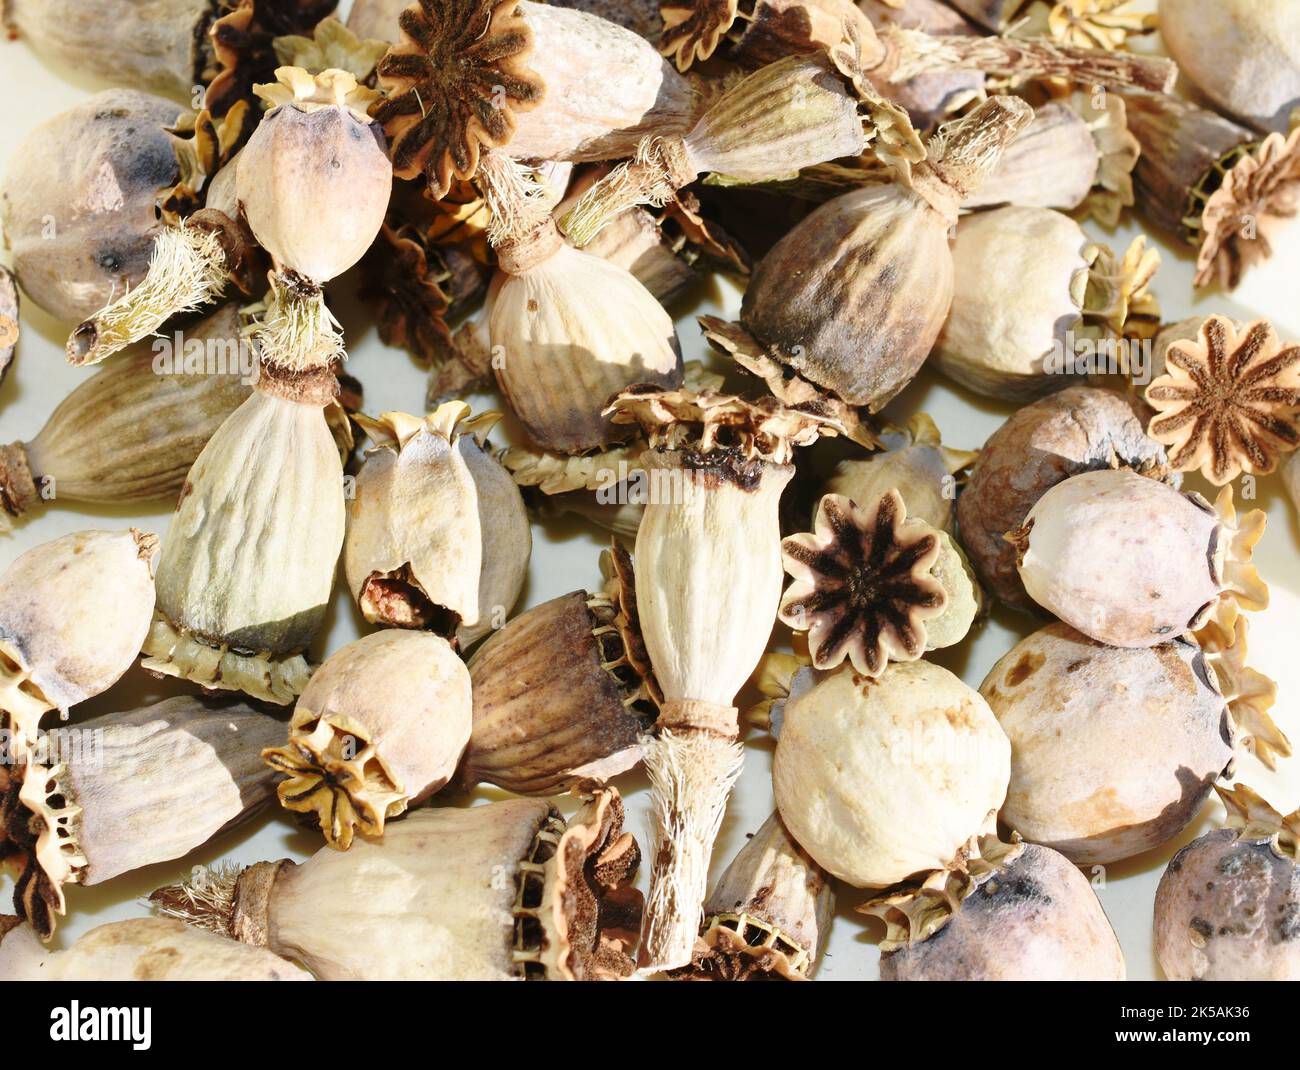 Big group of dry seed capsules from poppy plant on white background Stock Photo